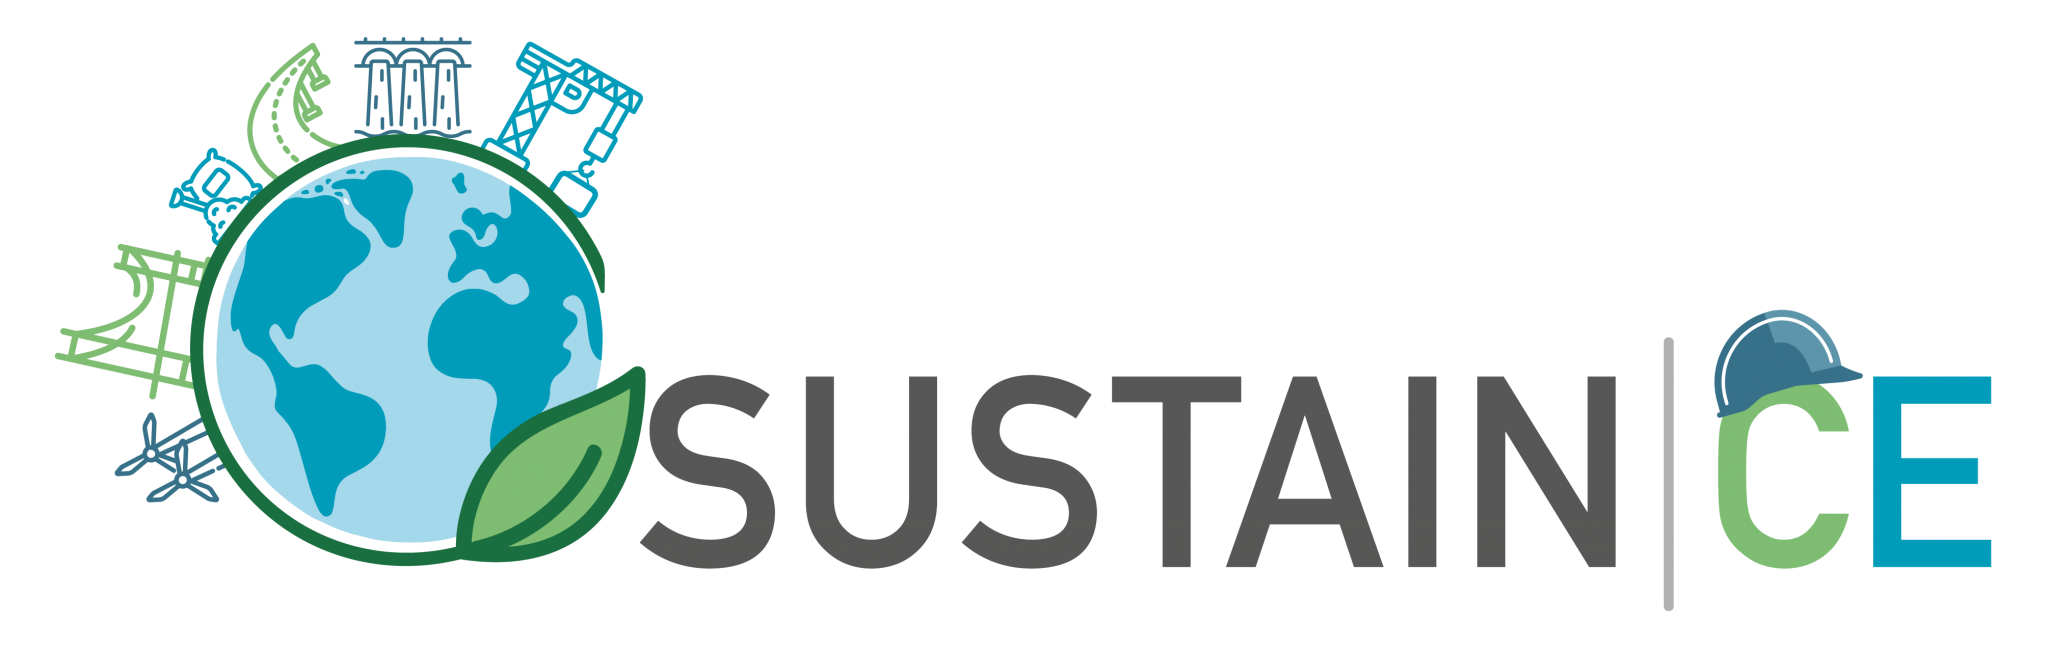 SUSTAIN-CE project: The Virtual Learning Environment has been launched